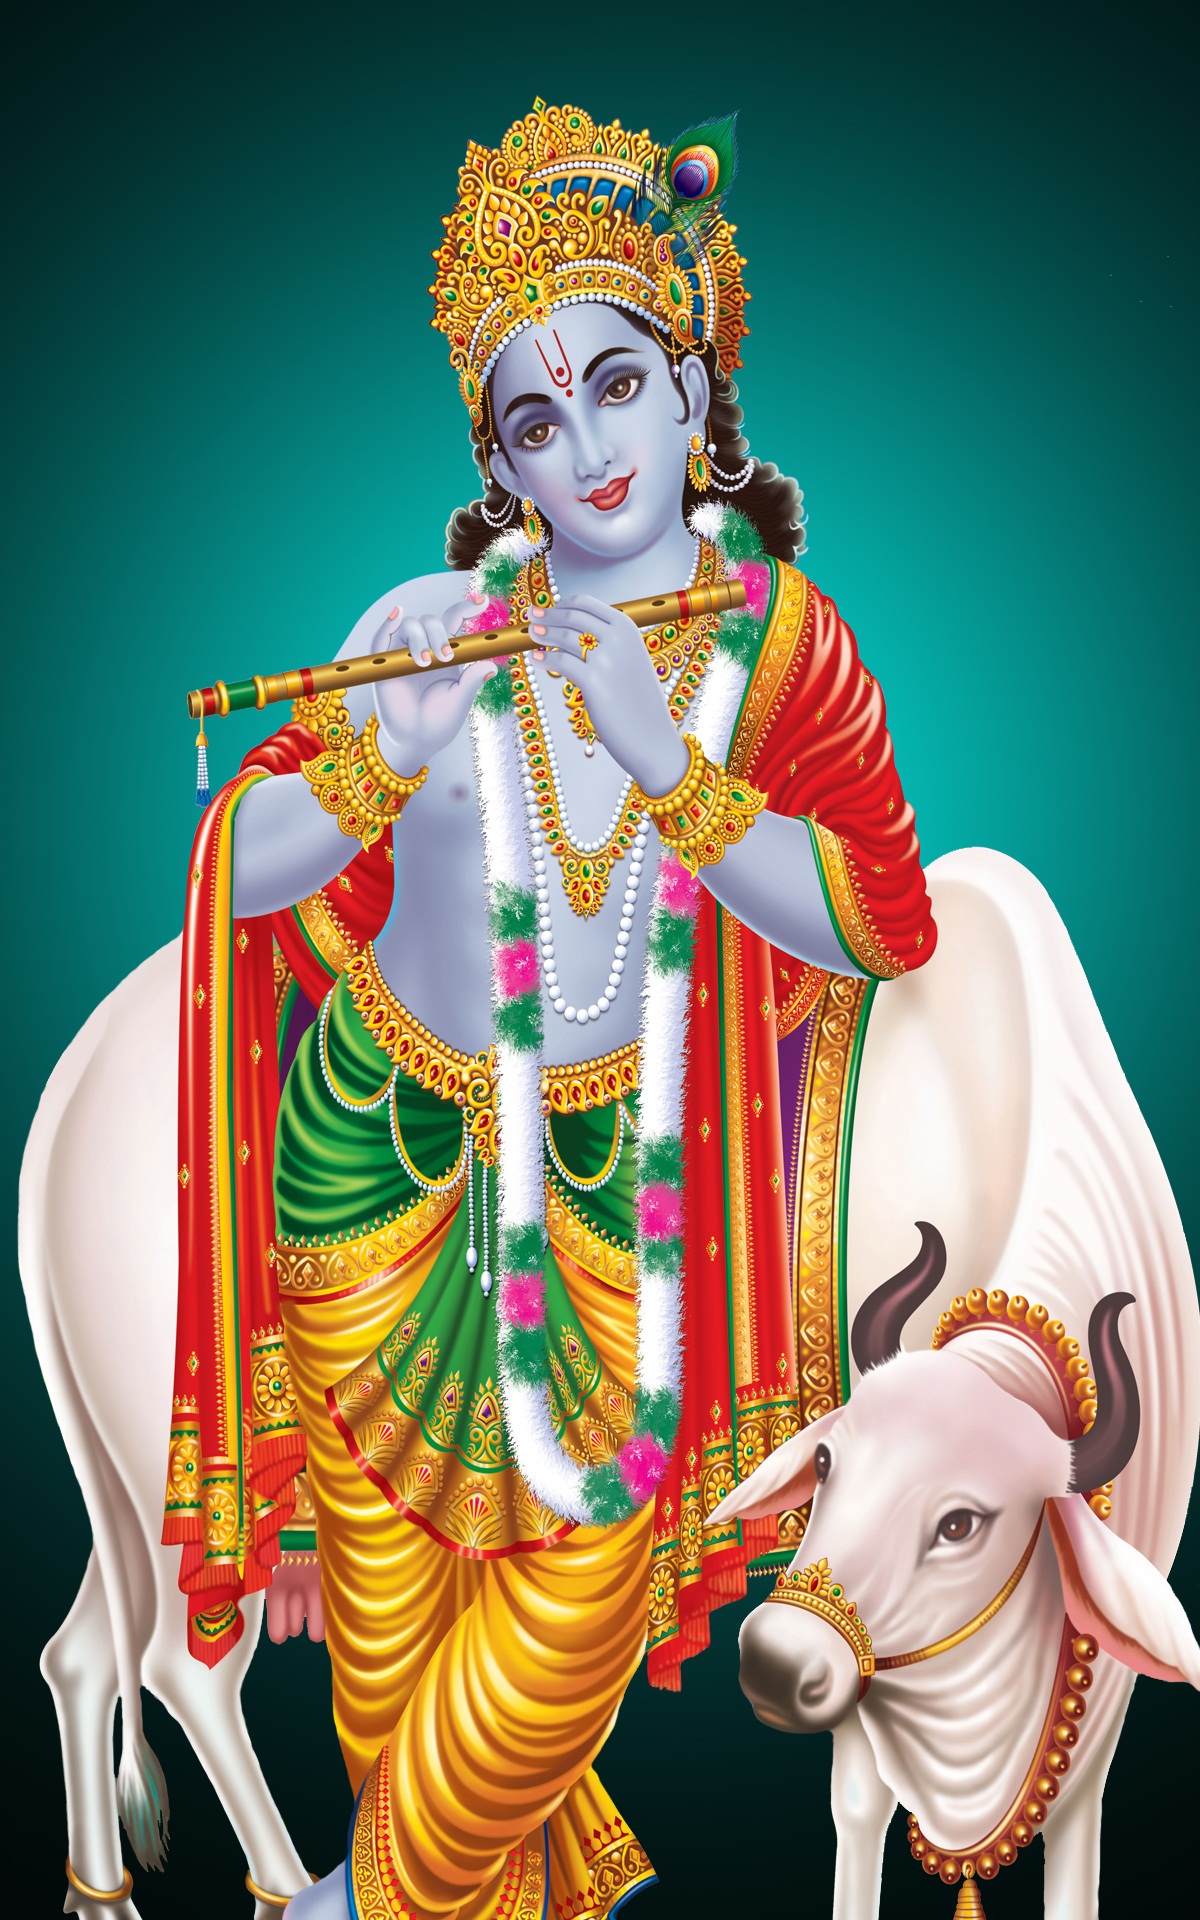 Painting of Lord krishna hd images for mobile